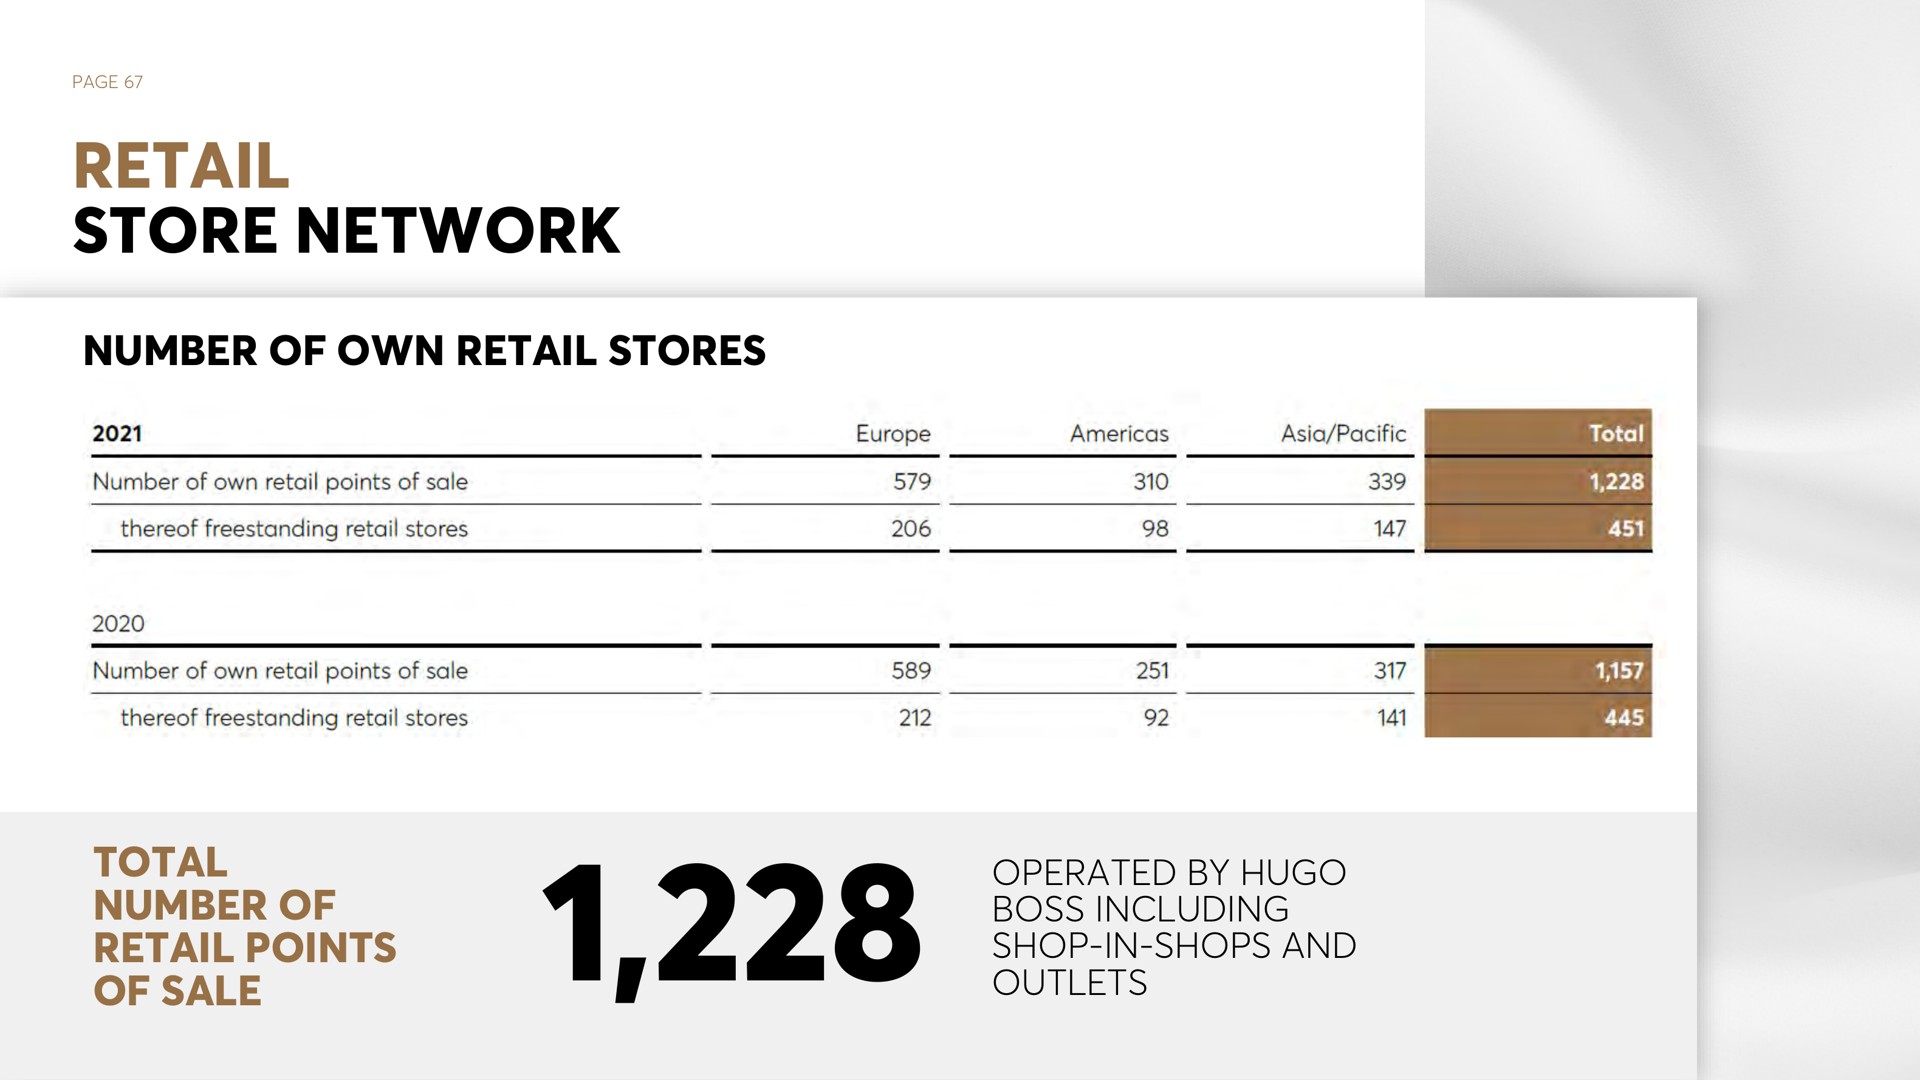 page retail store network number of own retail stores total number of retail points of sale operated by boss including shop in shops and outlets | Hugo Boss